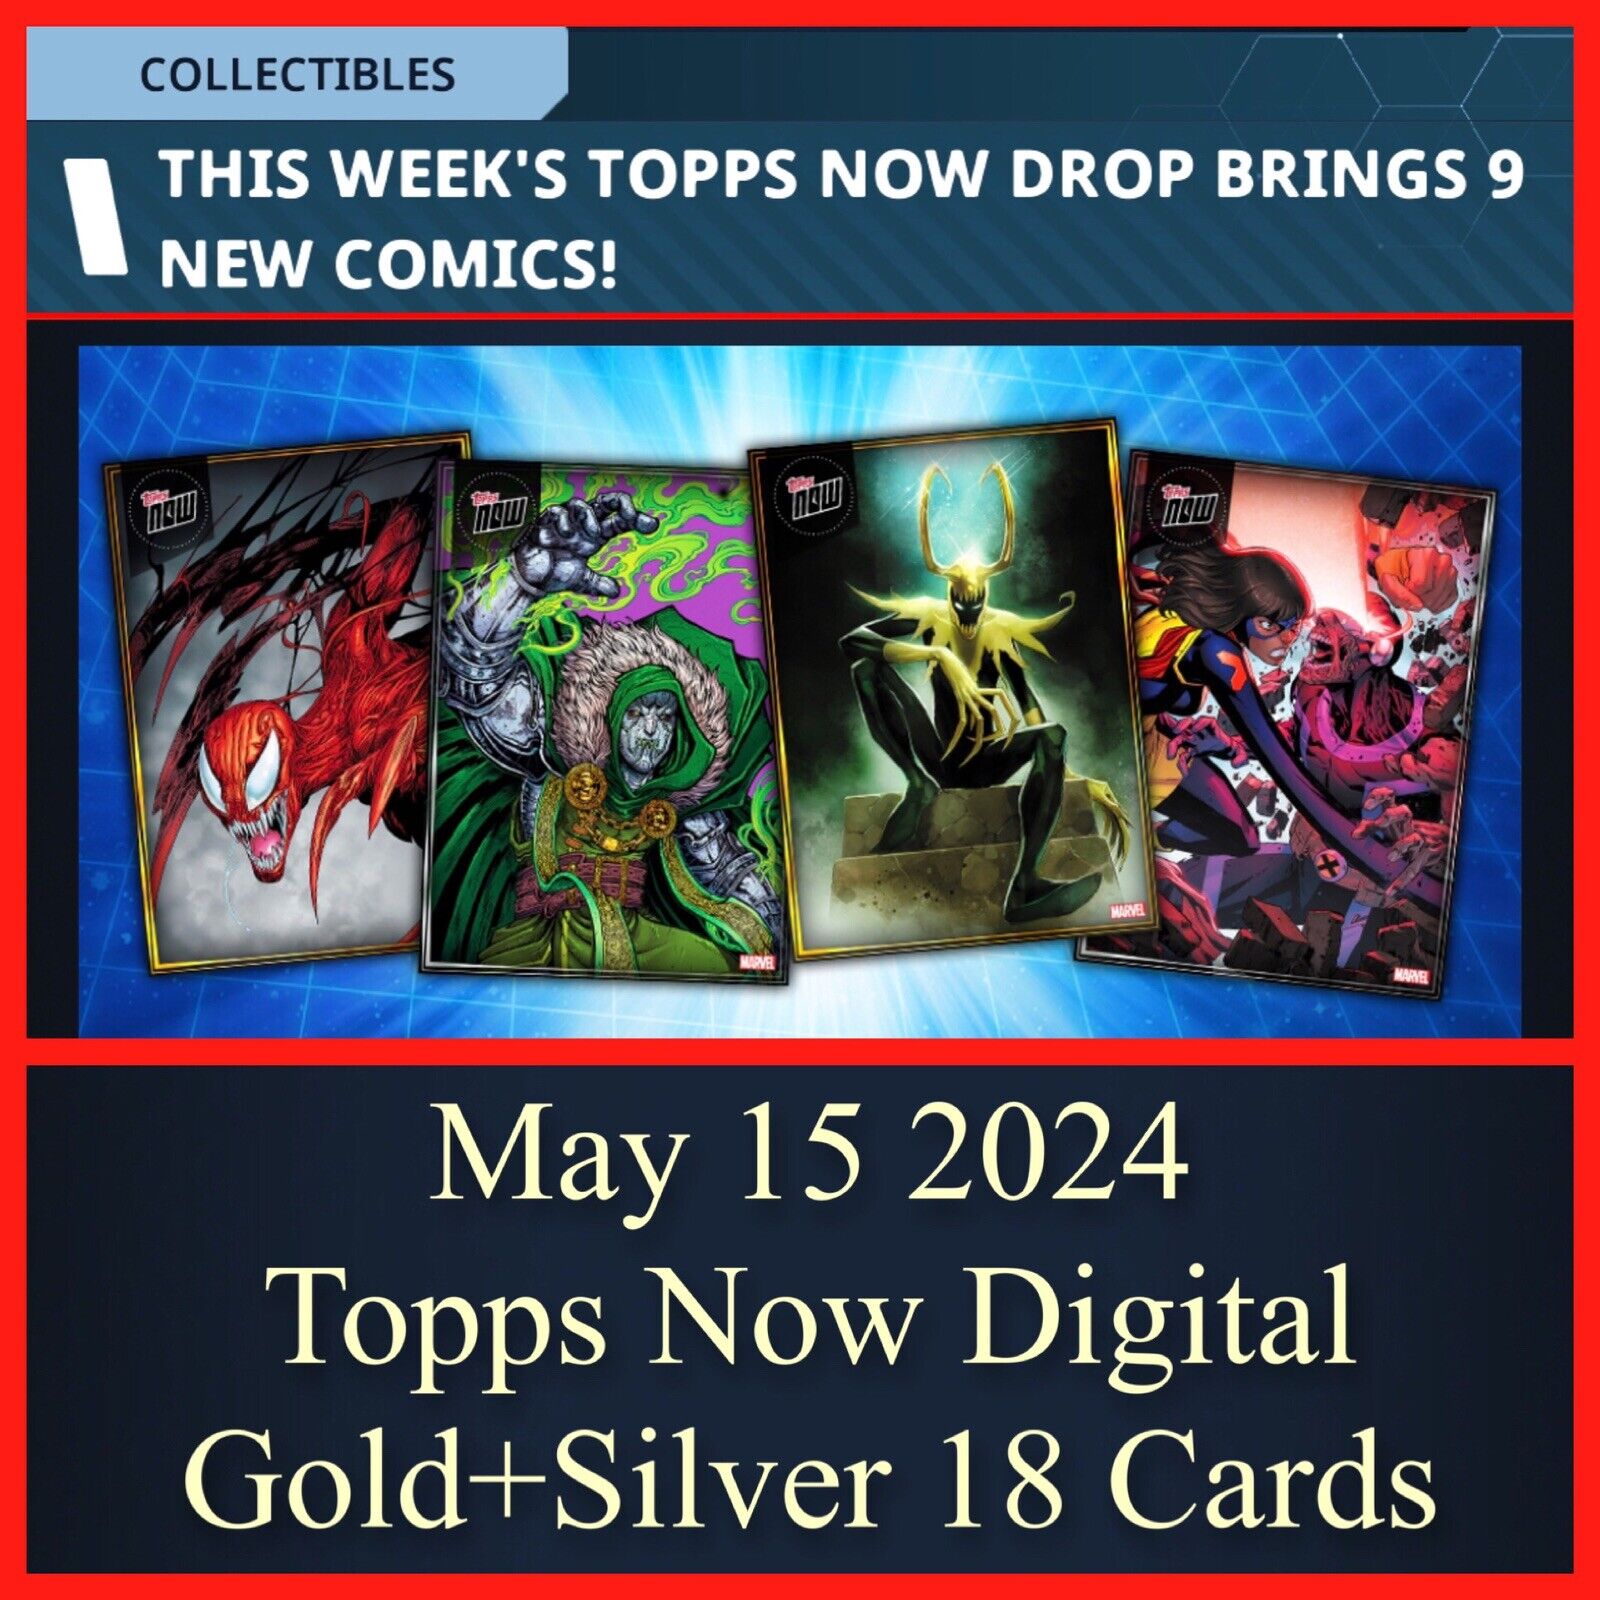 TOPPS MARVEL COLLECT TOPPS NOW MAY 15 2024 SR GOLD+RARE SILVER 18 CARD SET